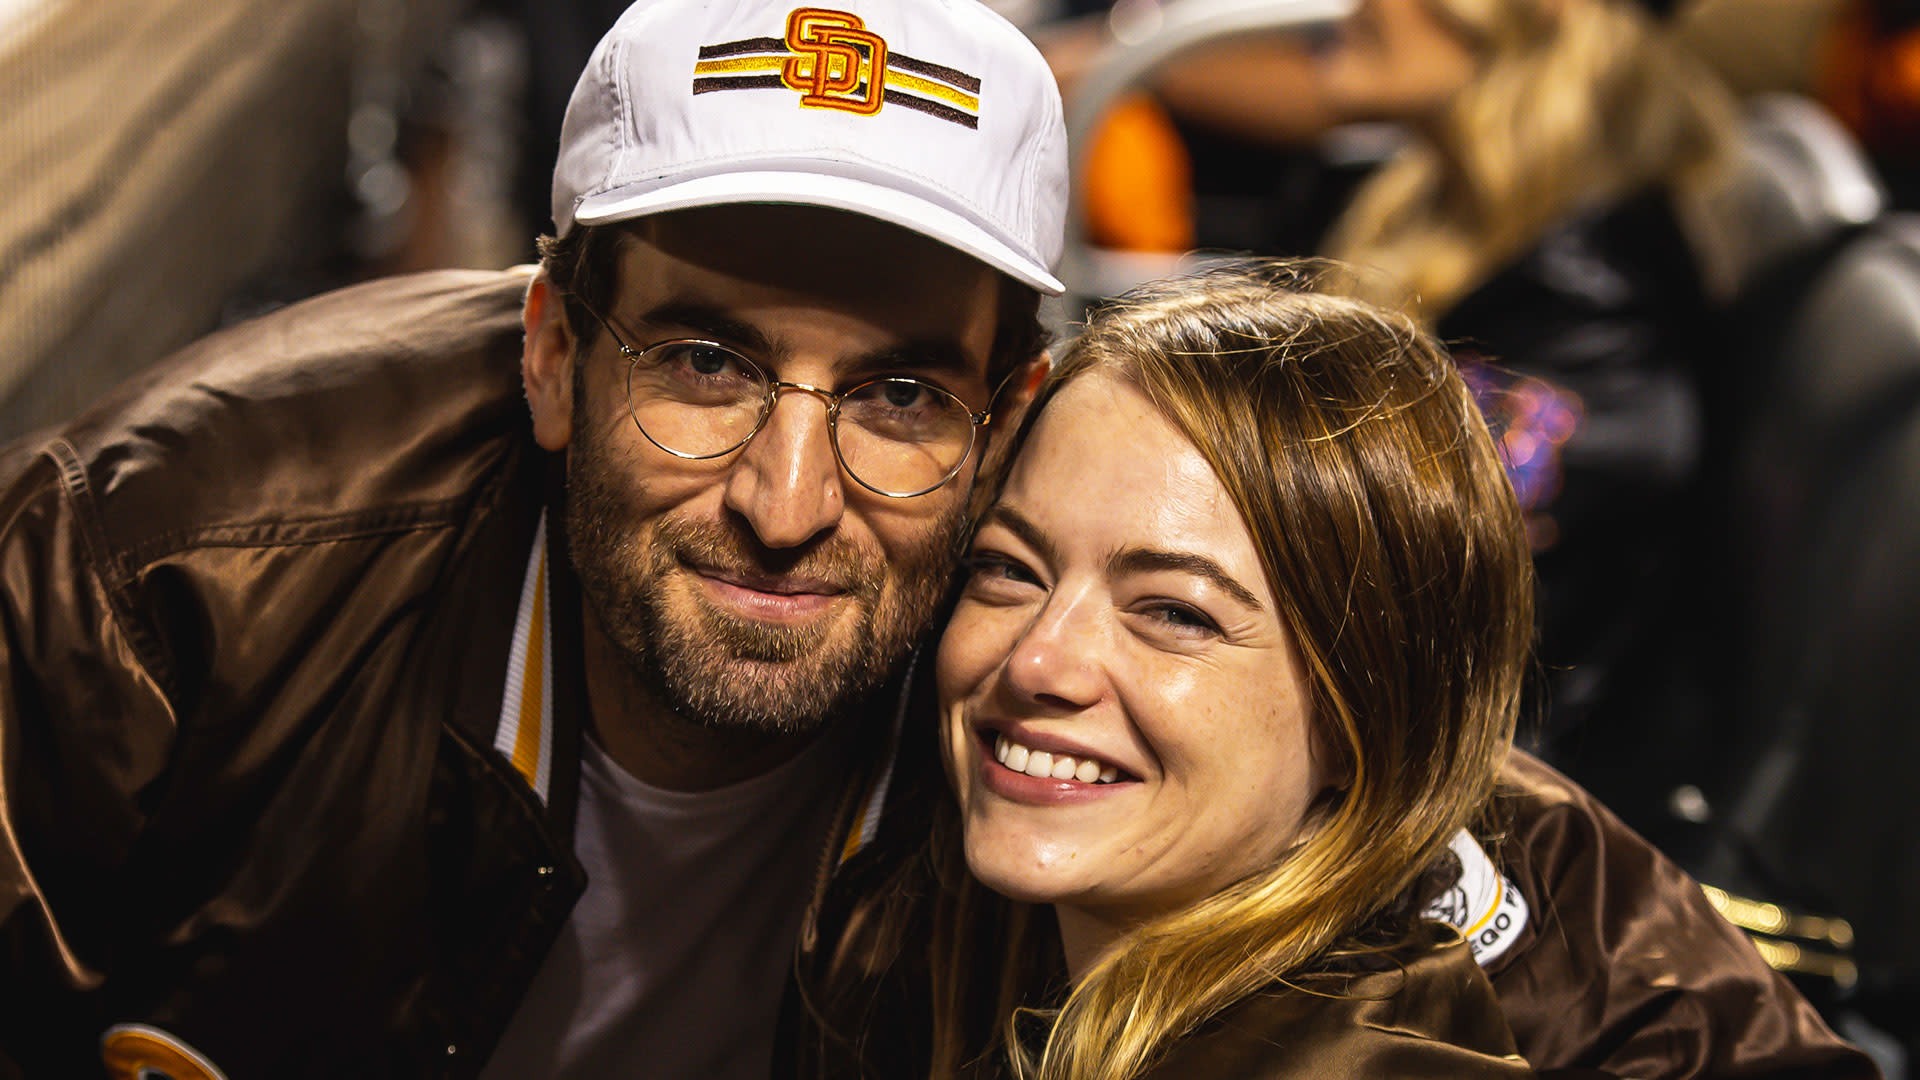 Emma Stone, husband Dave McCary pose for photos at Padres game